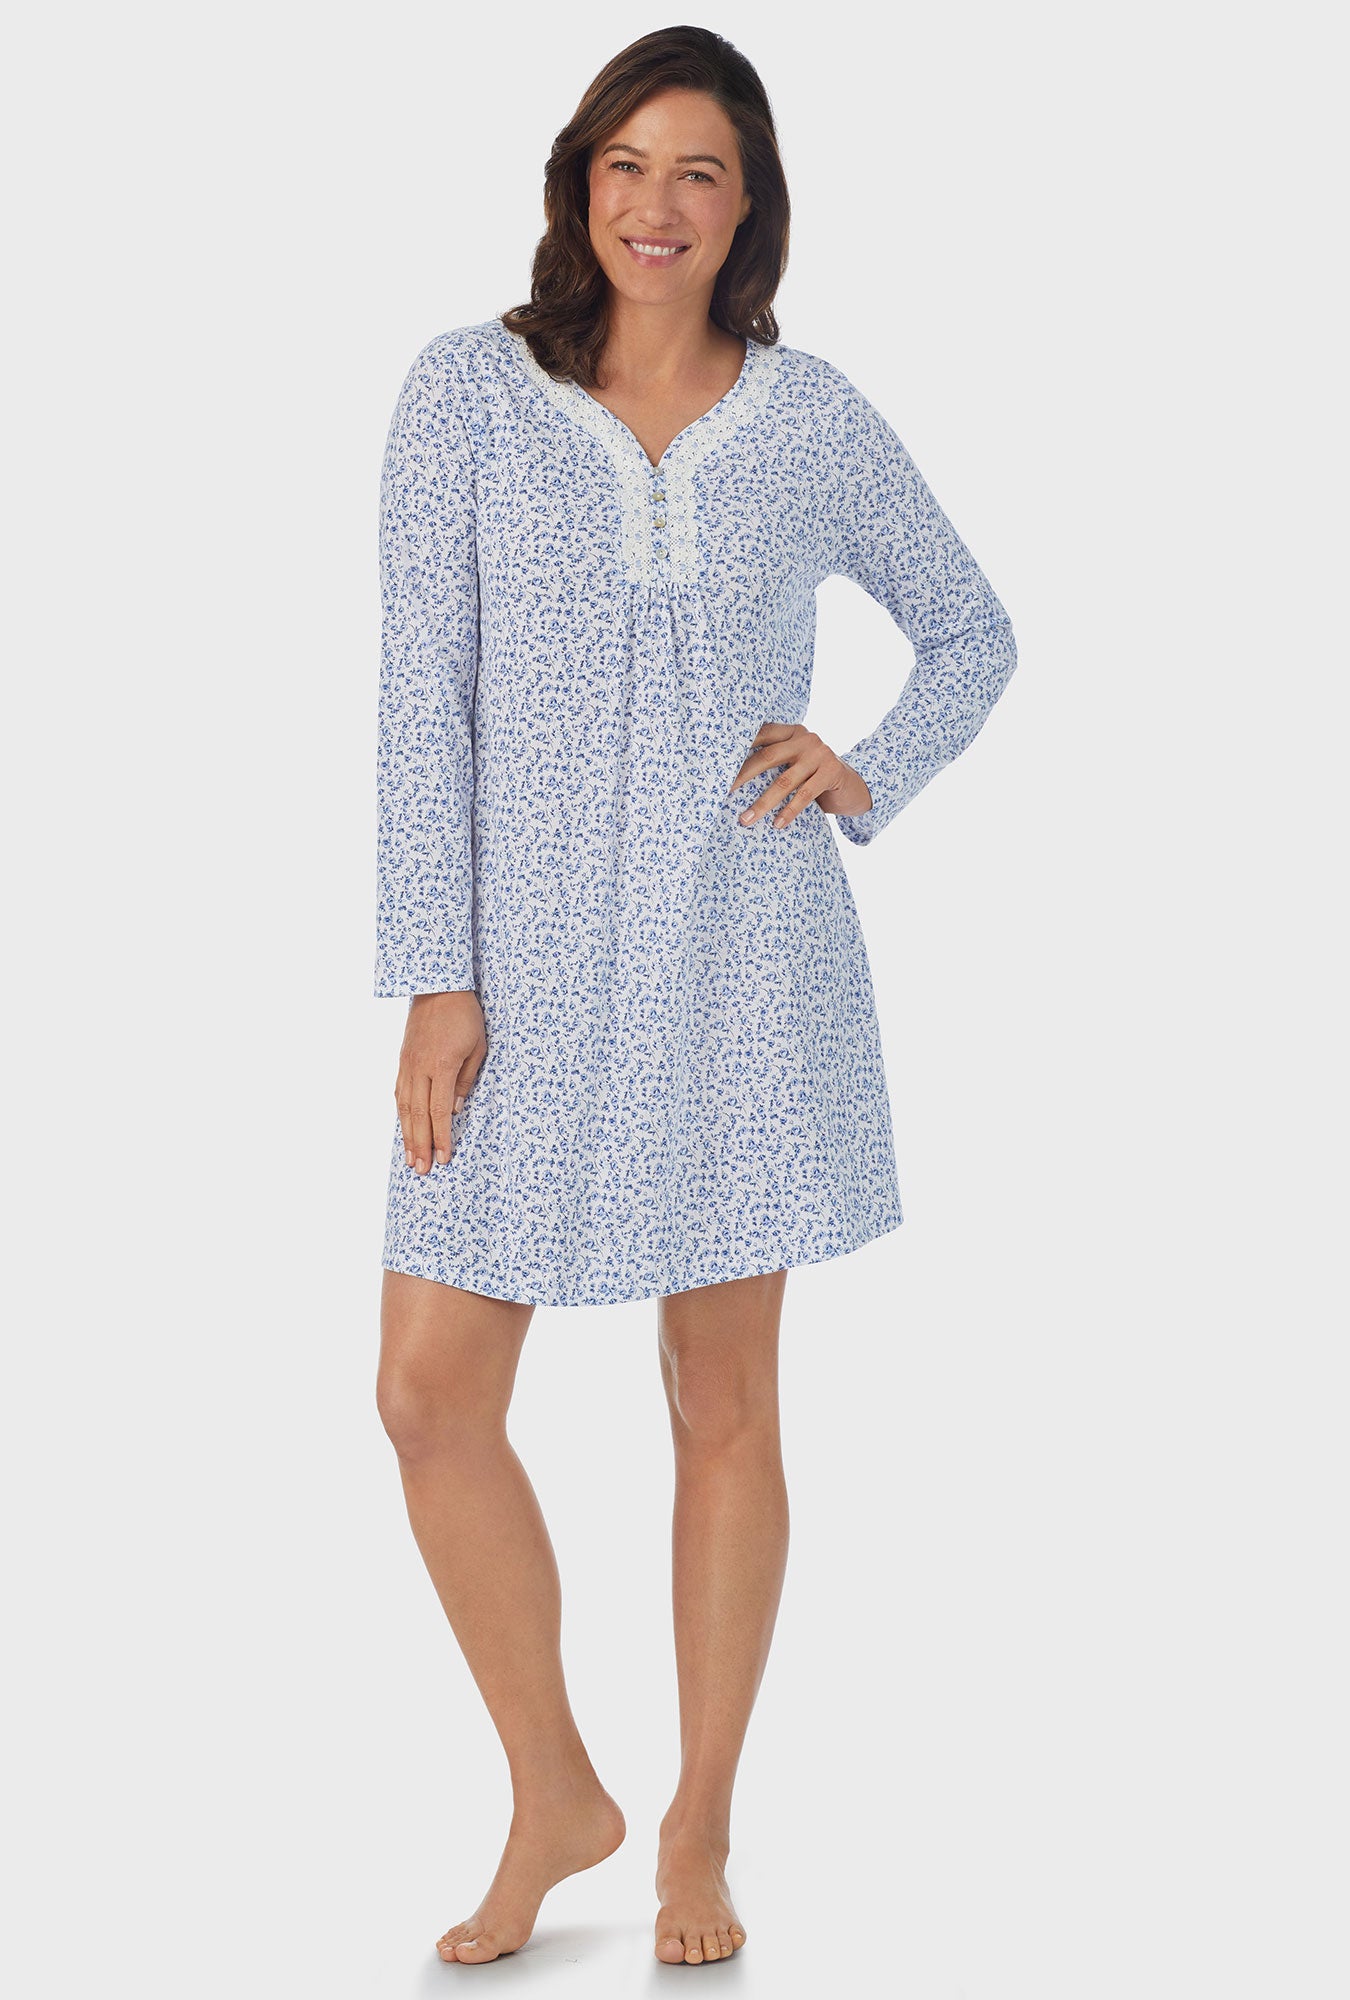 A lady wearing white Long Sleeve Nightgown with Dusty Blue  print